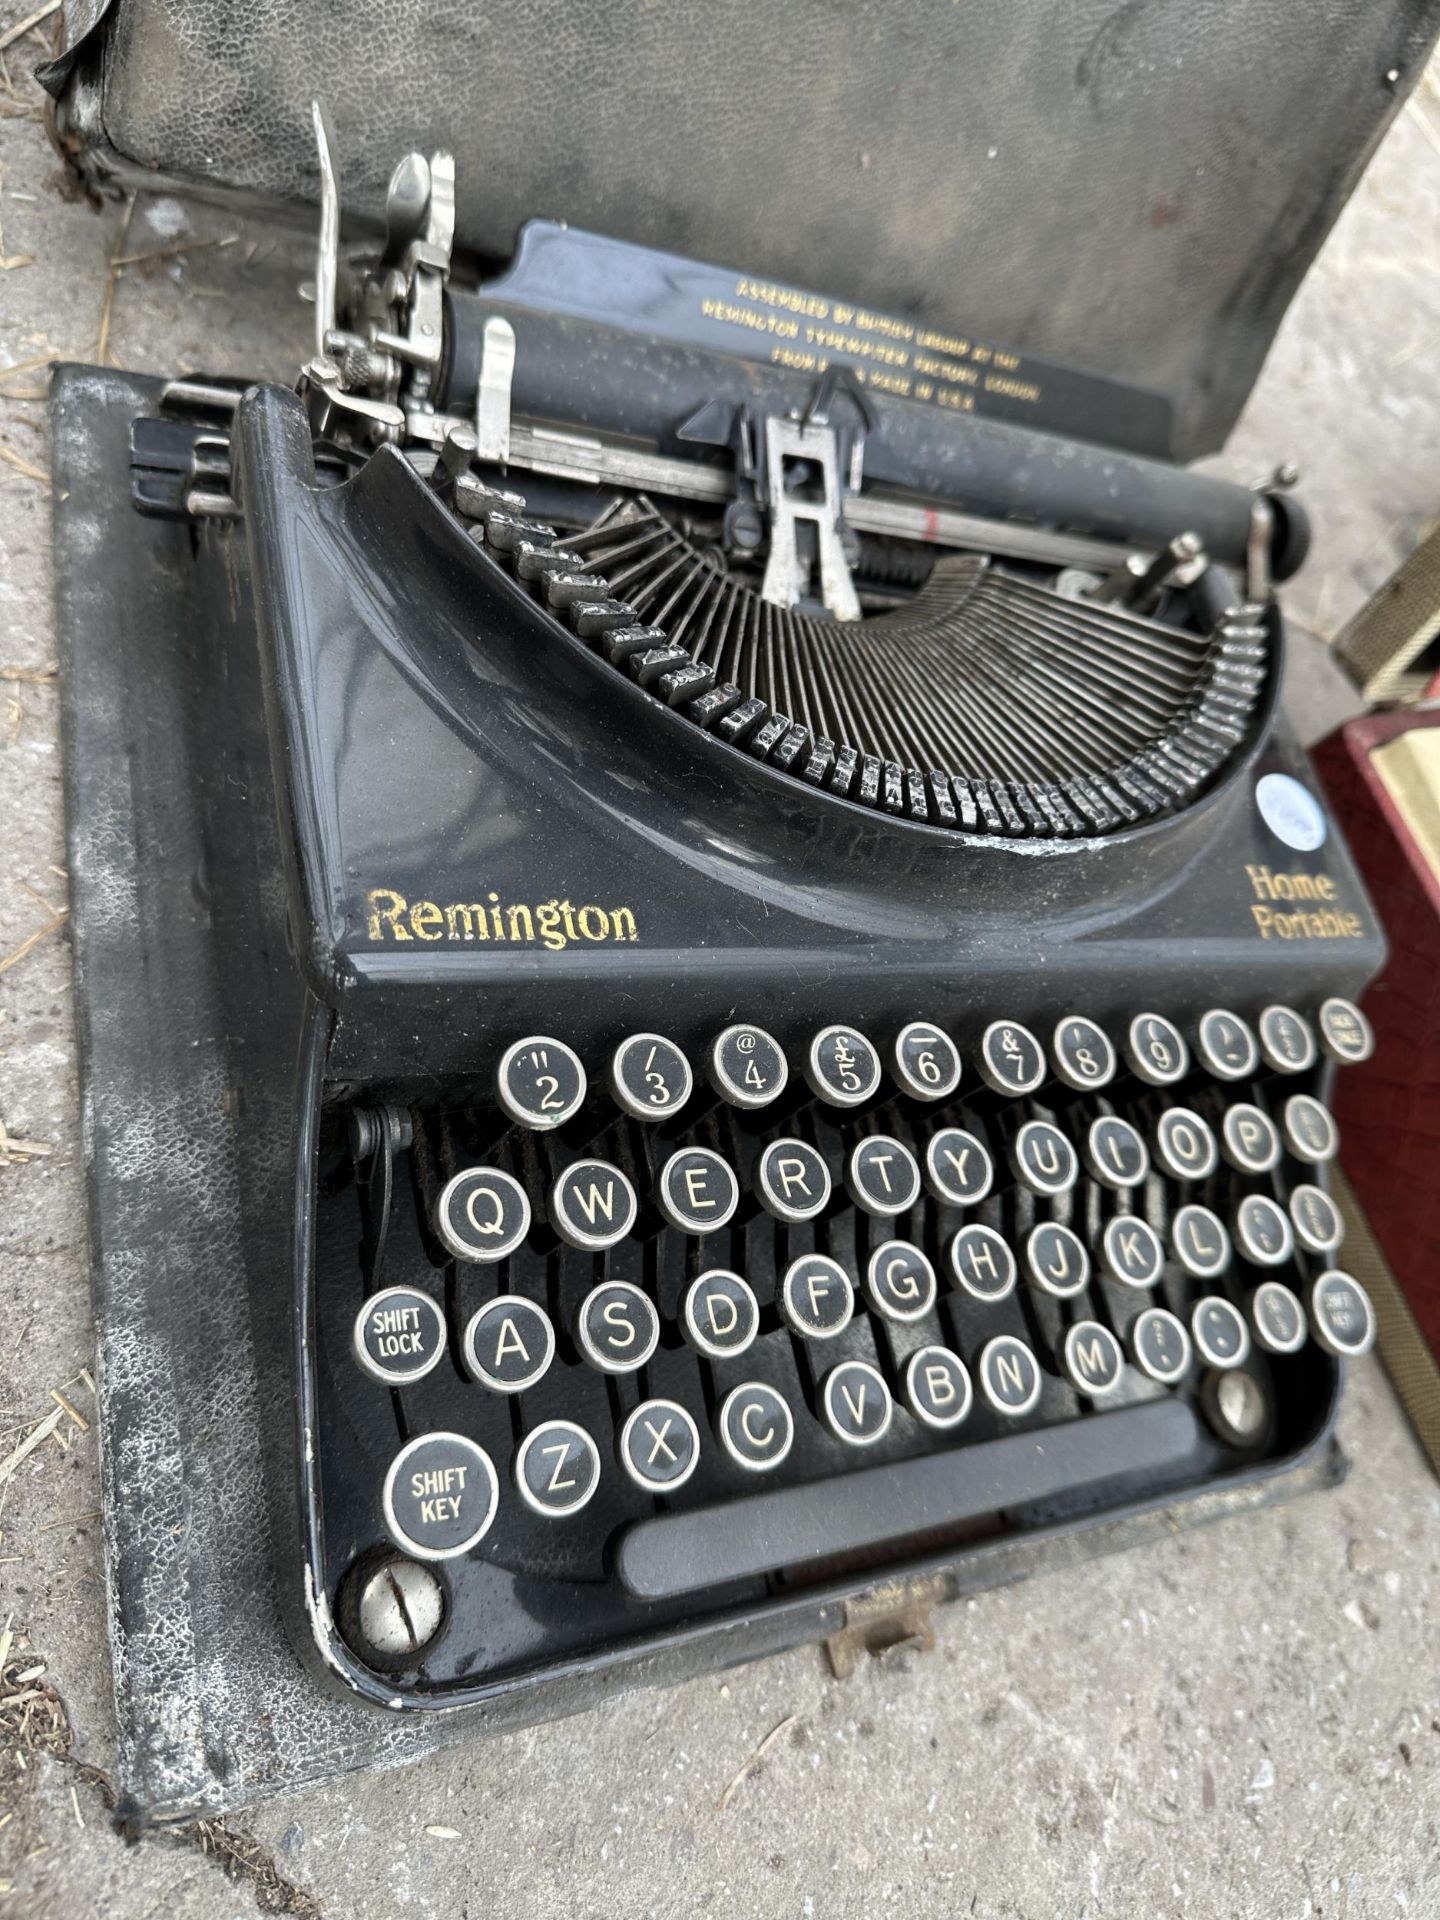 A VINTAGE REMINGTON TYPEWRITER WITH CARRY CASE AND A RETRO RADIO - Image 2 of 2